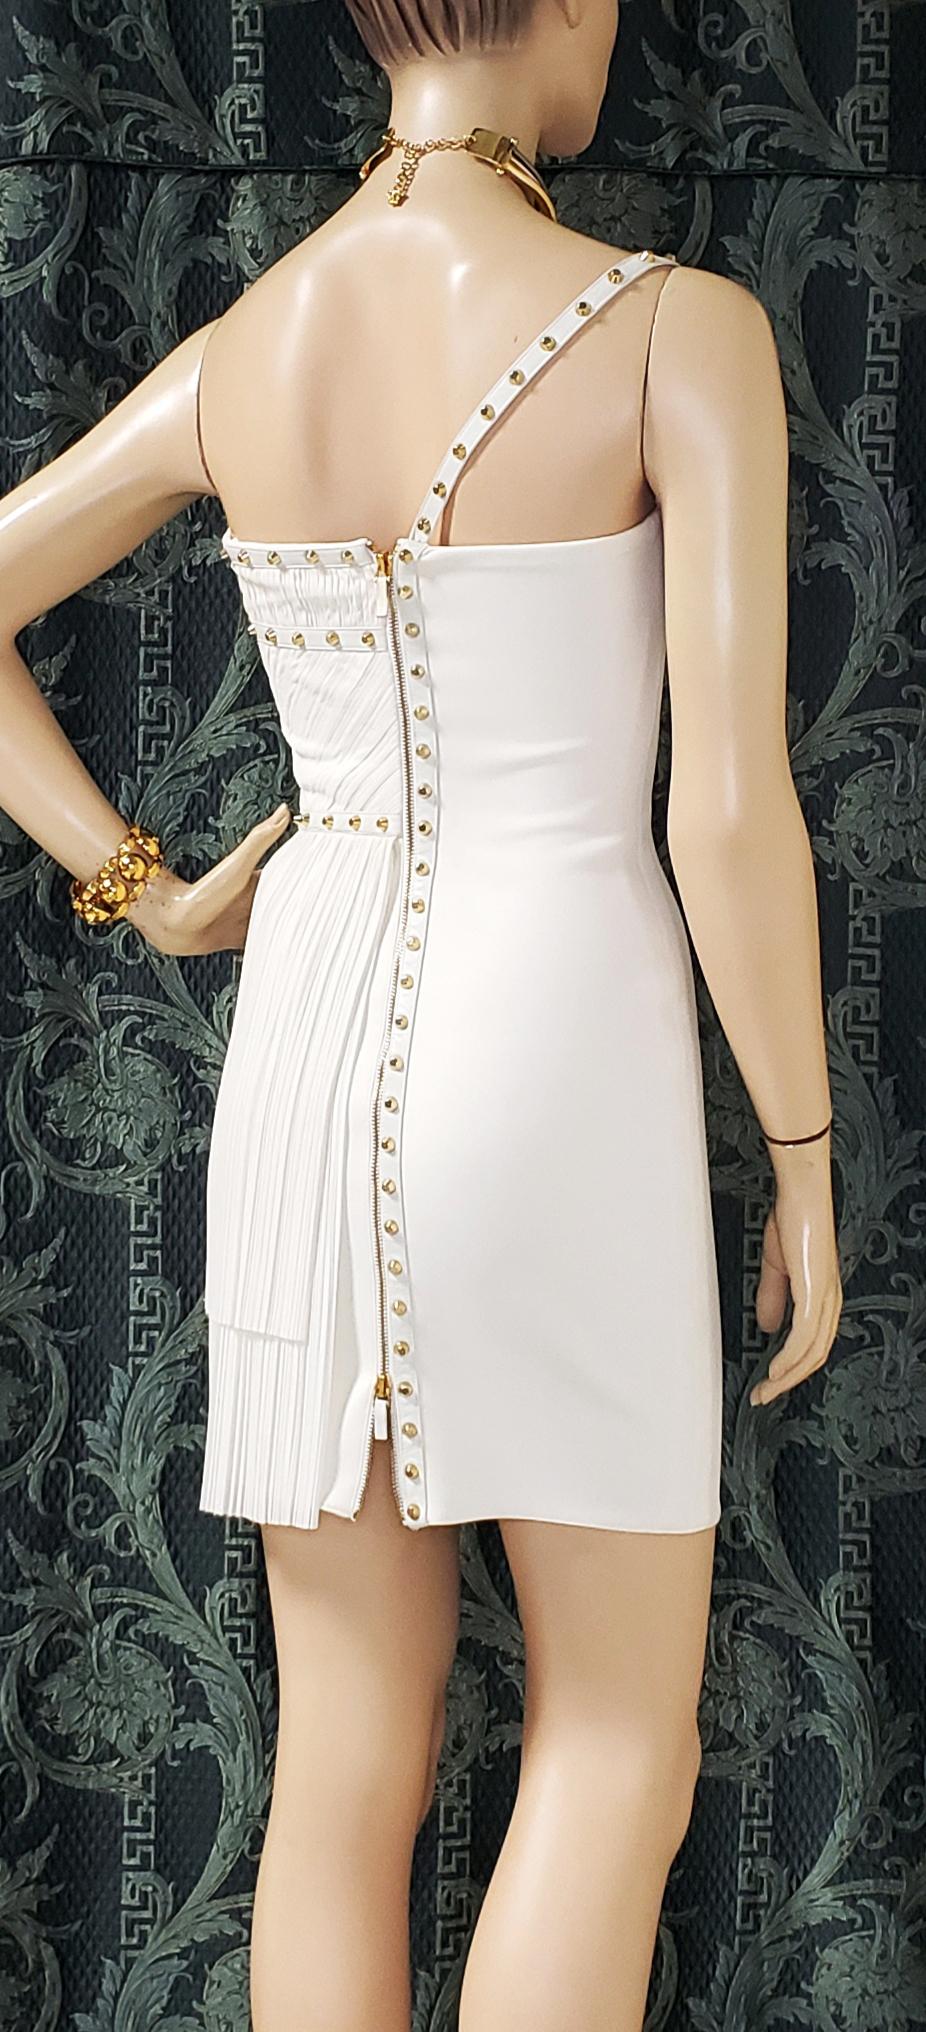 S/S 2012 look # 35 NEW VERSACE ONE SHOULDER WHITE STUDDED DRESS 38 - 2 4